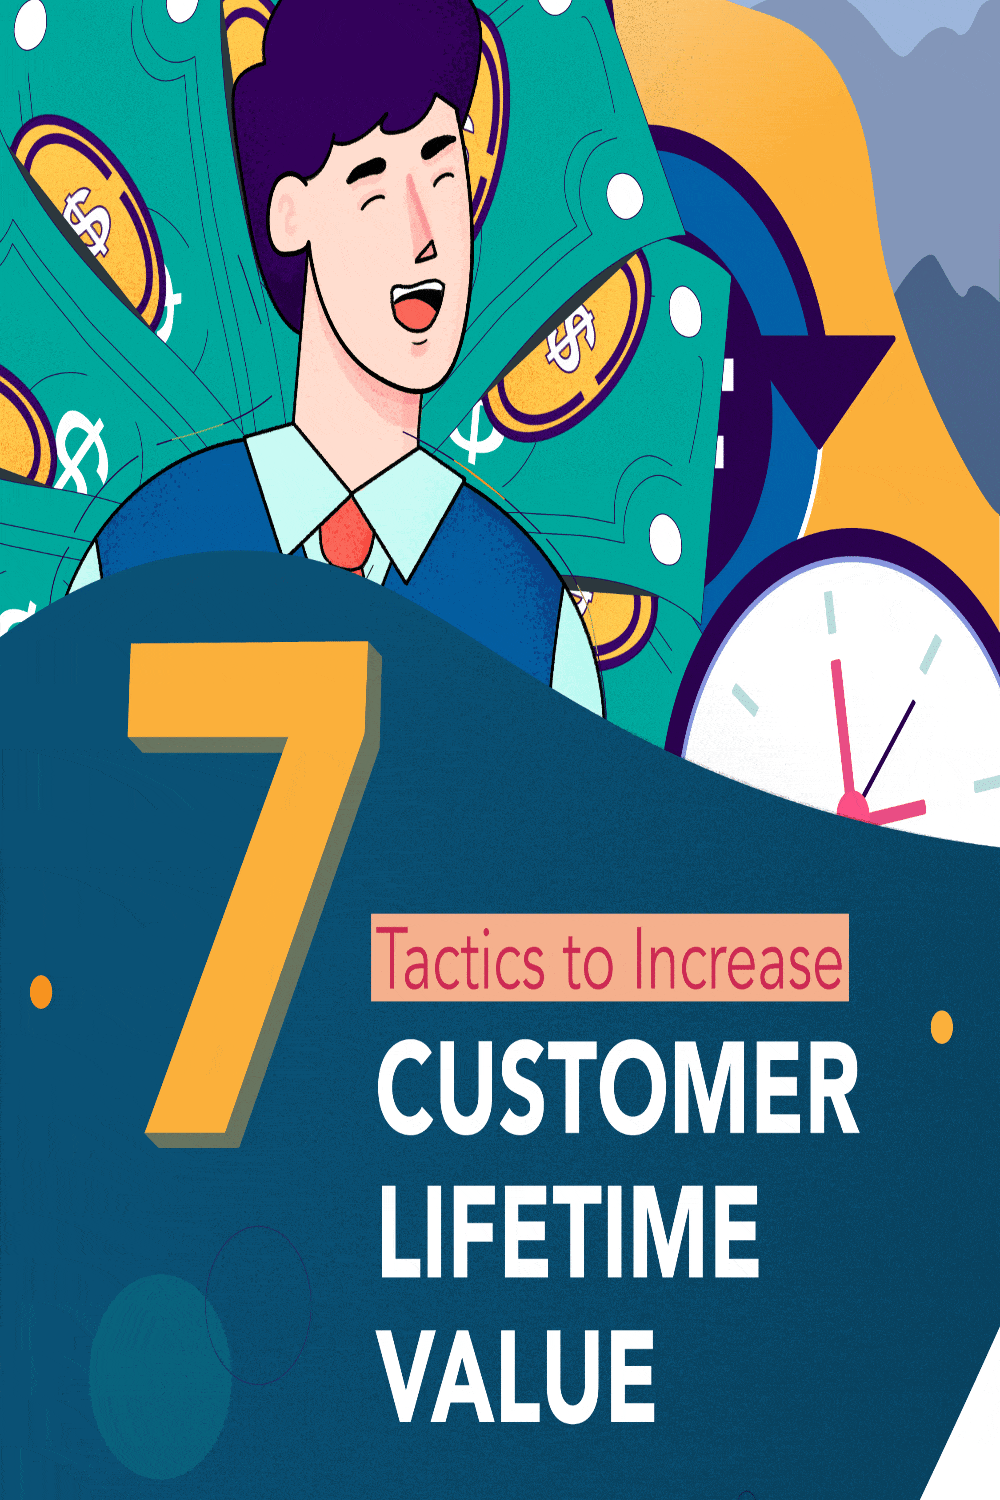 7 Ways to Increase Customer Lifetime Value